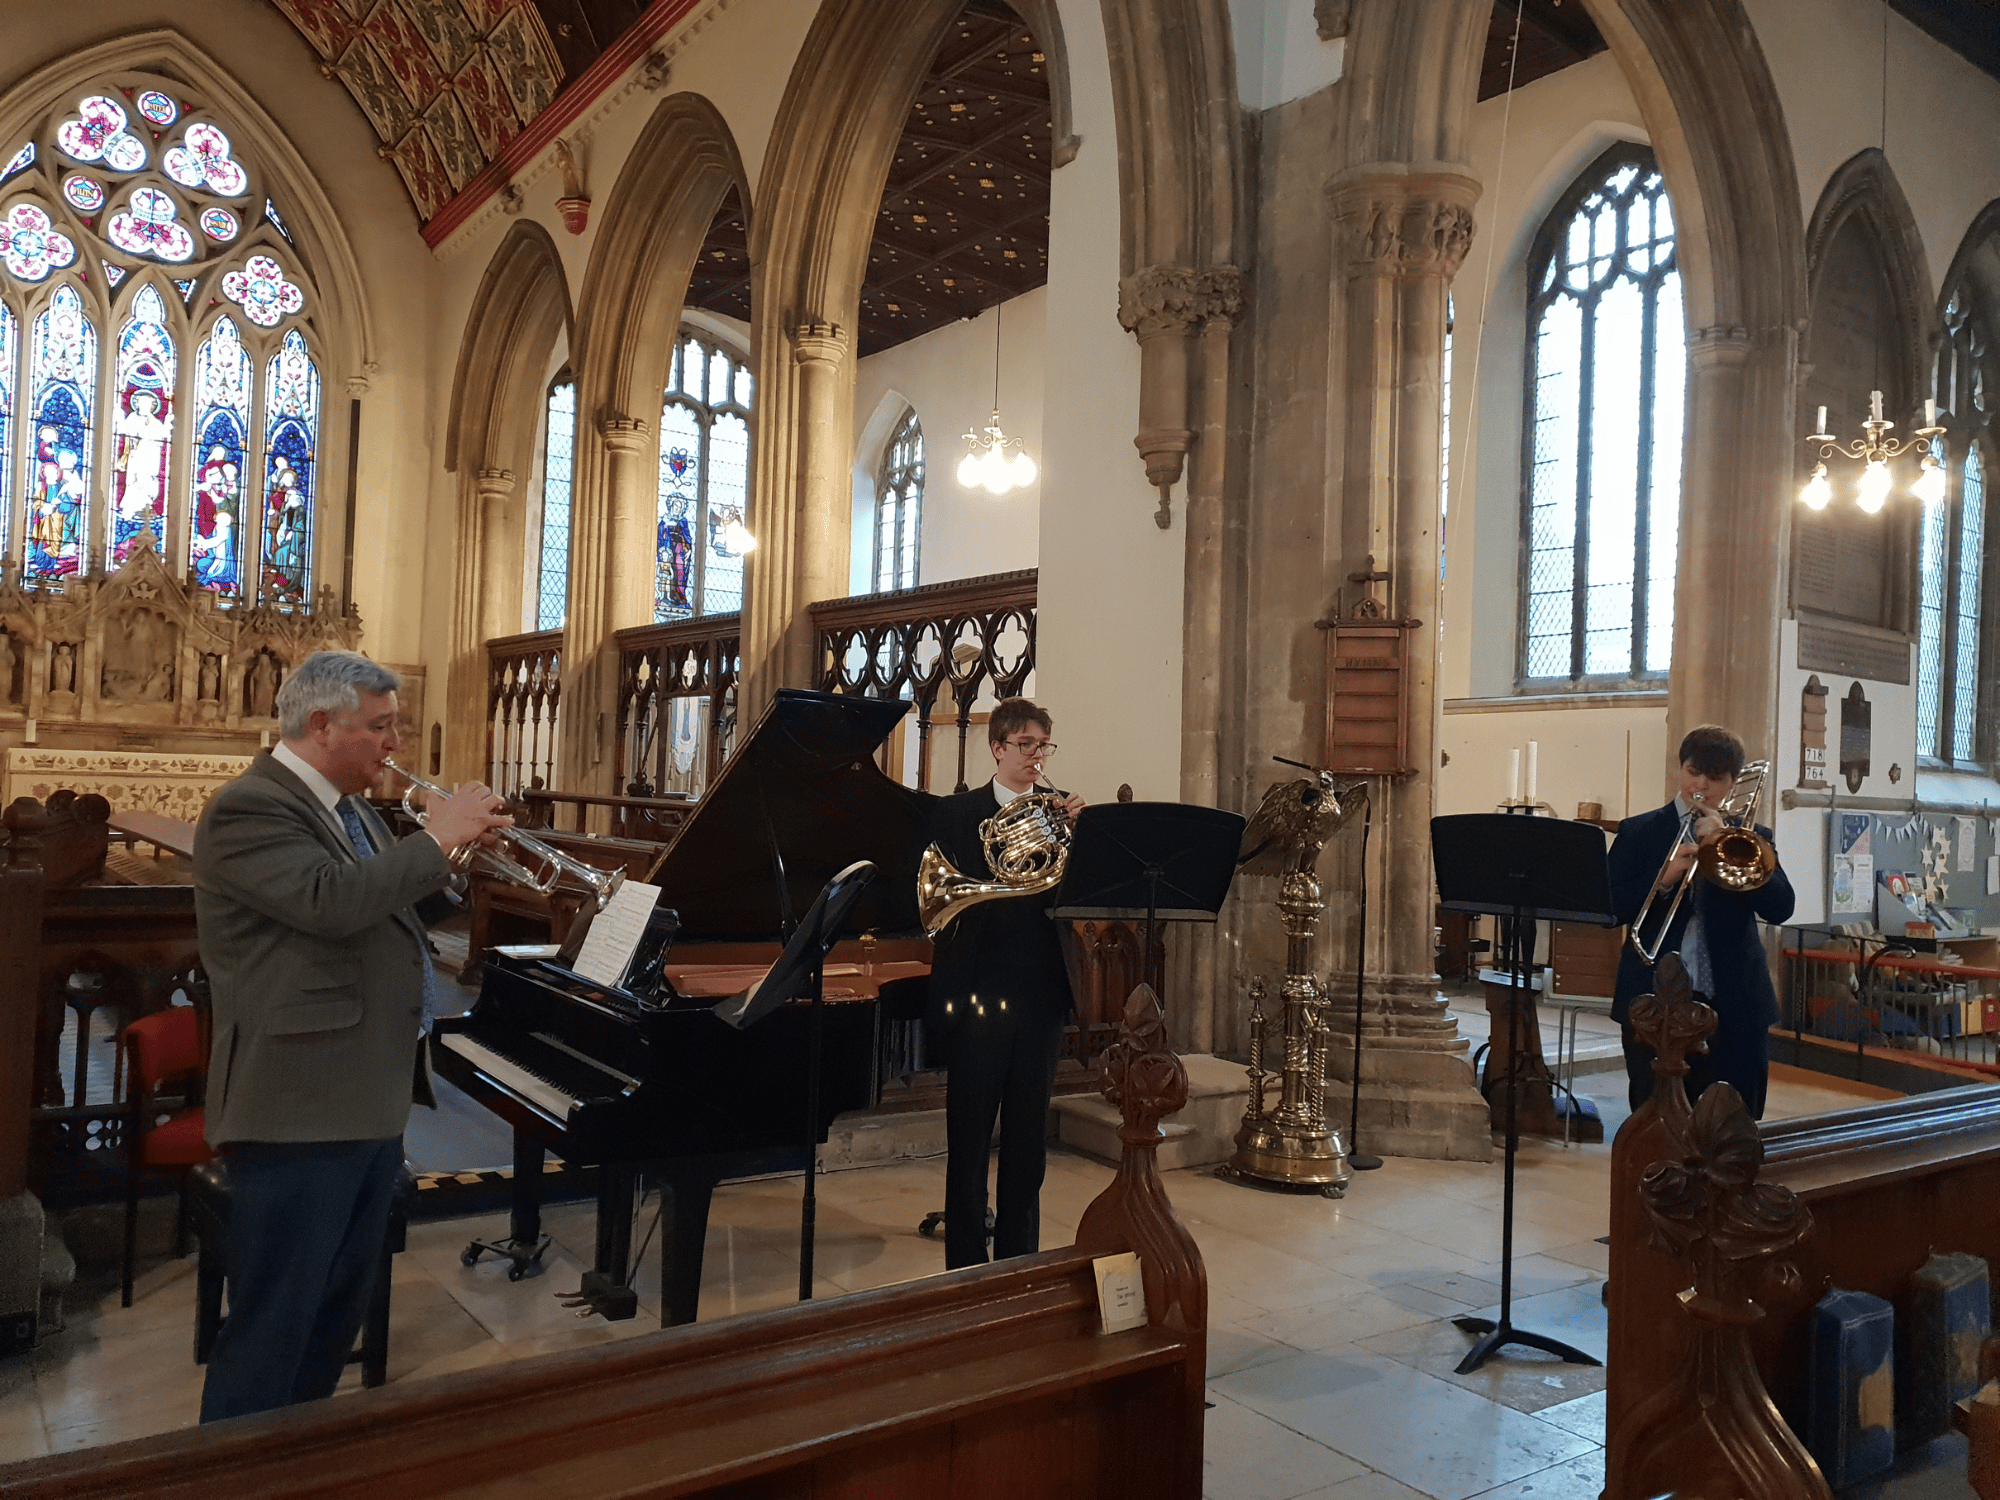 A trio of trumpet, horn and trombone perform in a church